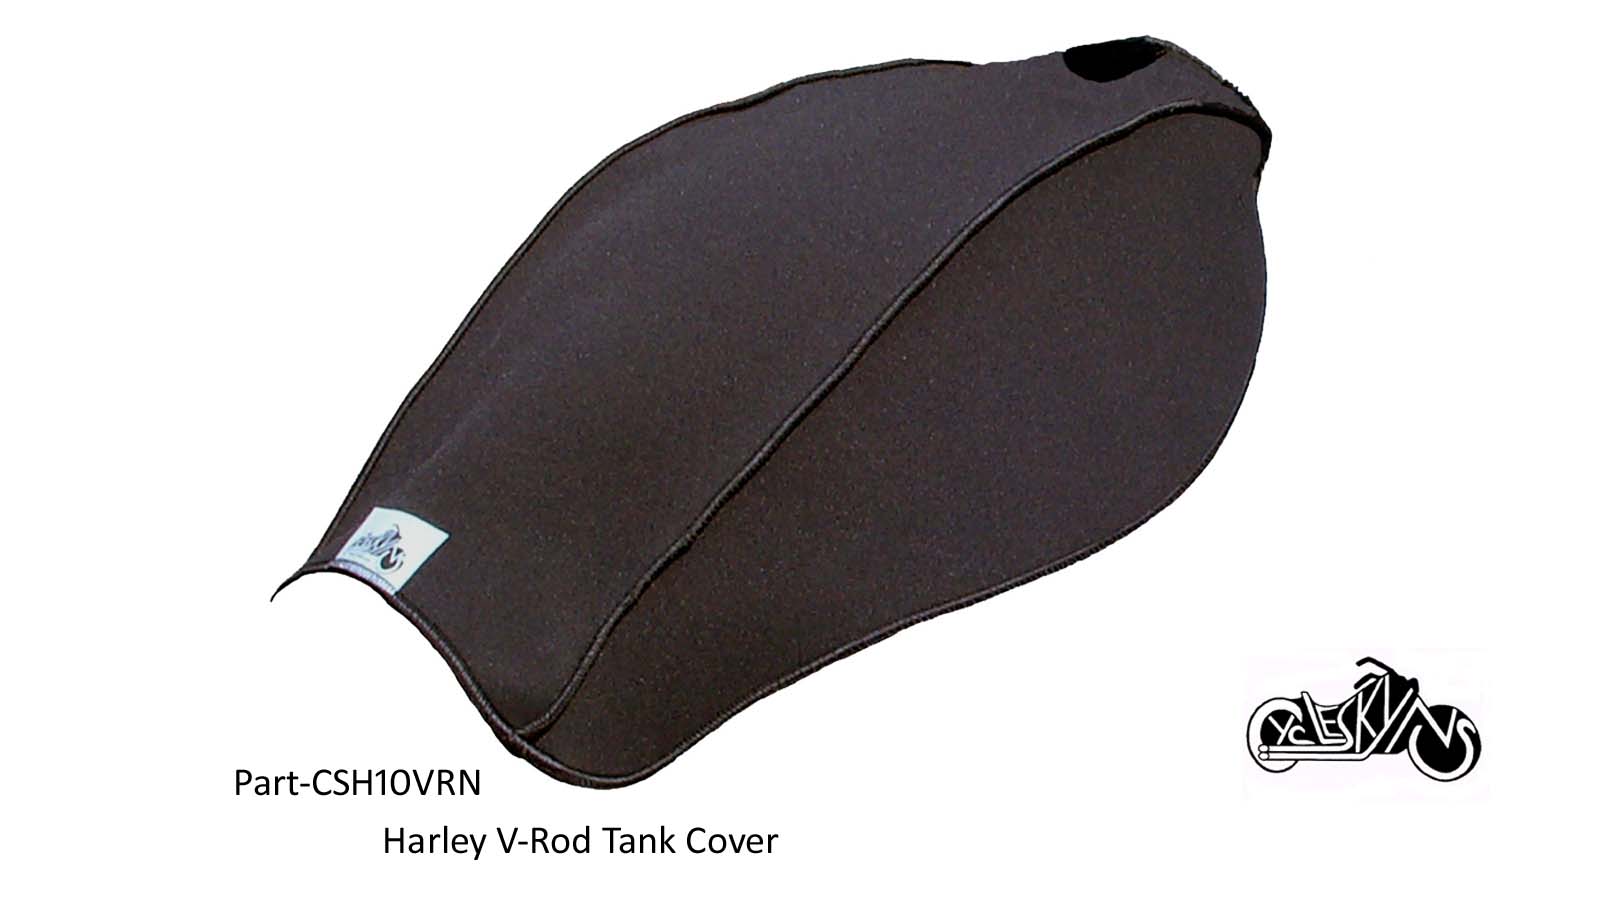 Neoprene Protective mechanic's Cover designed for the V-Rod shaped Harley Davidson gas tank without top or side pockets.